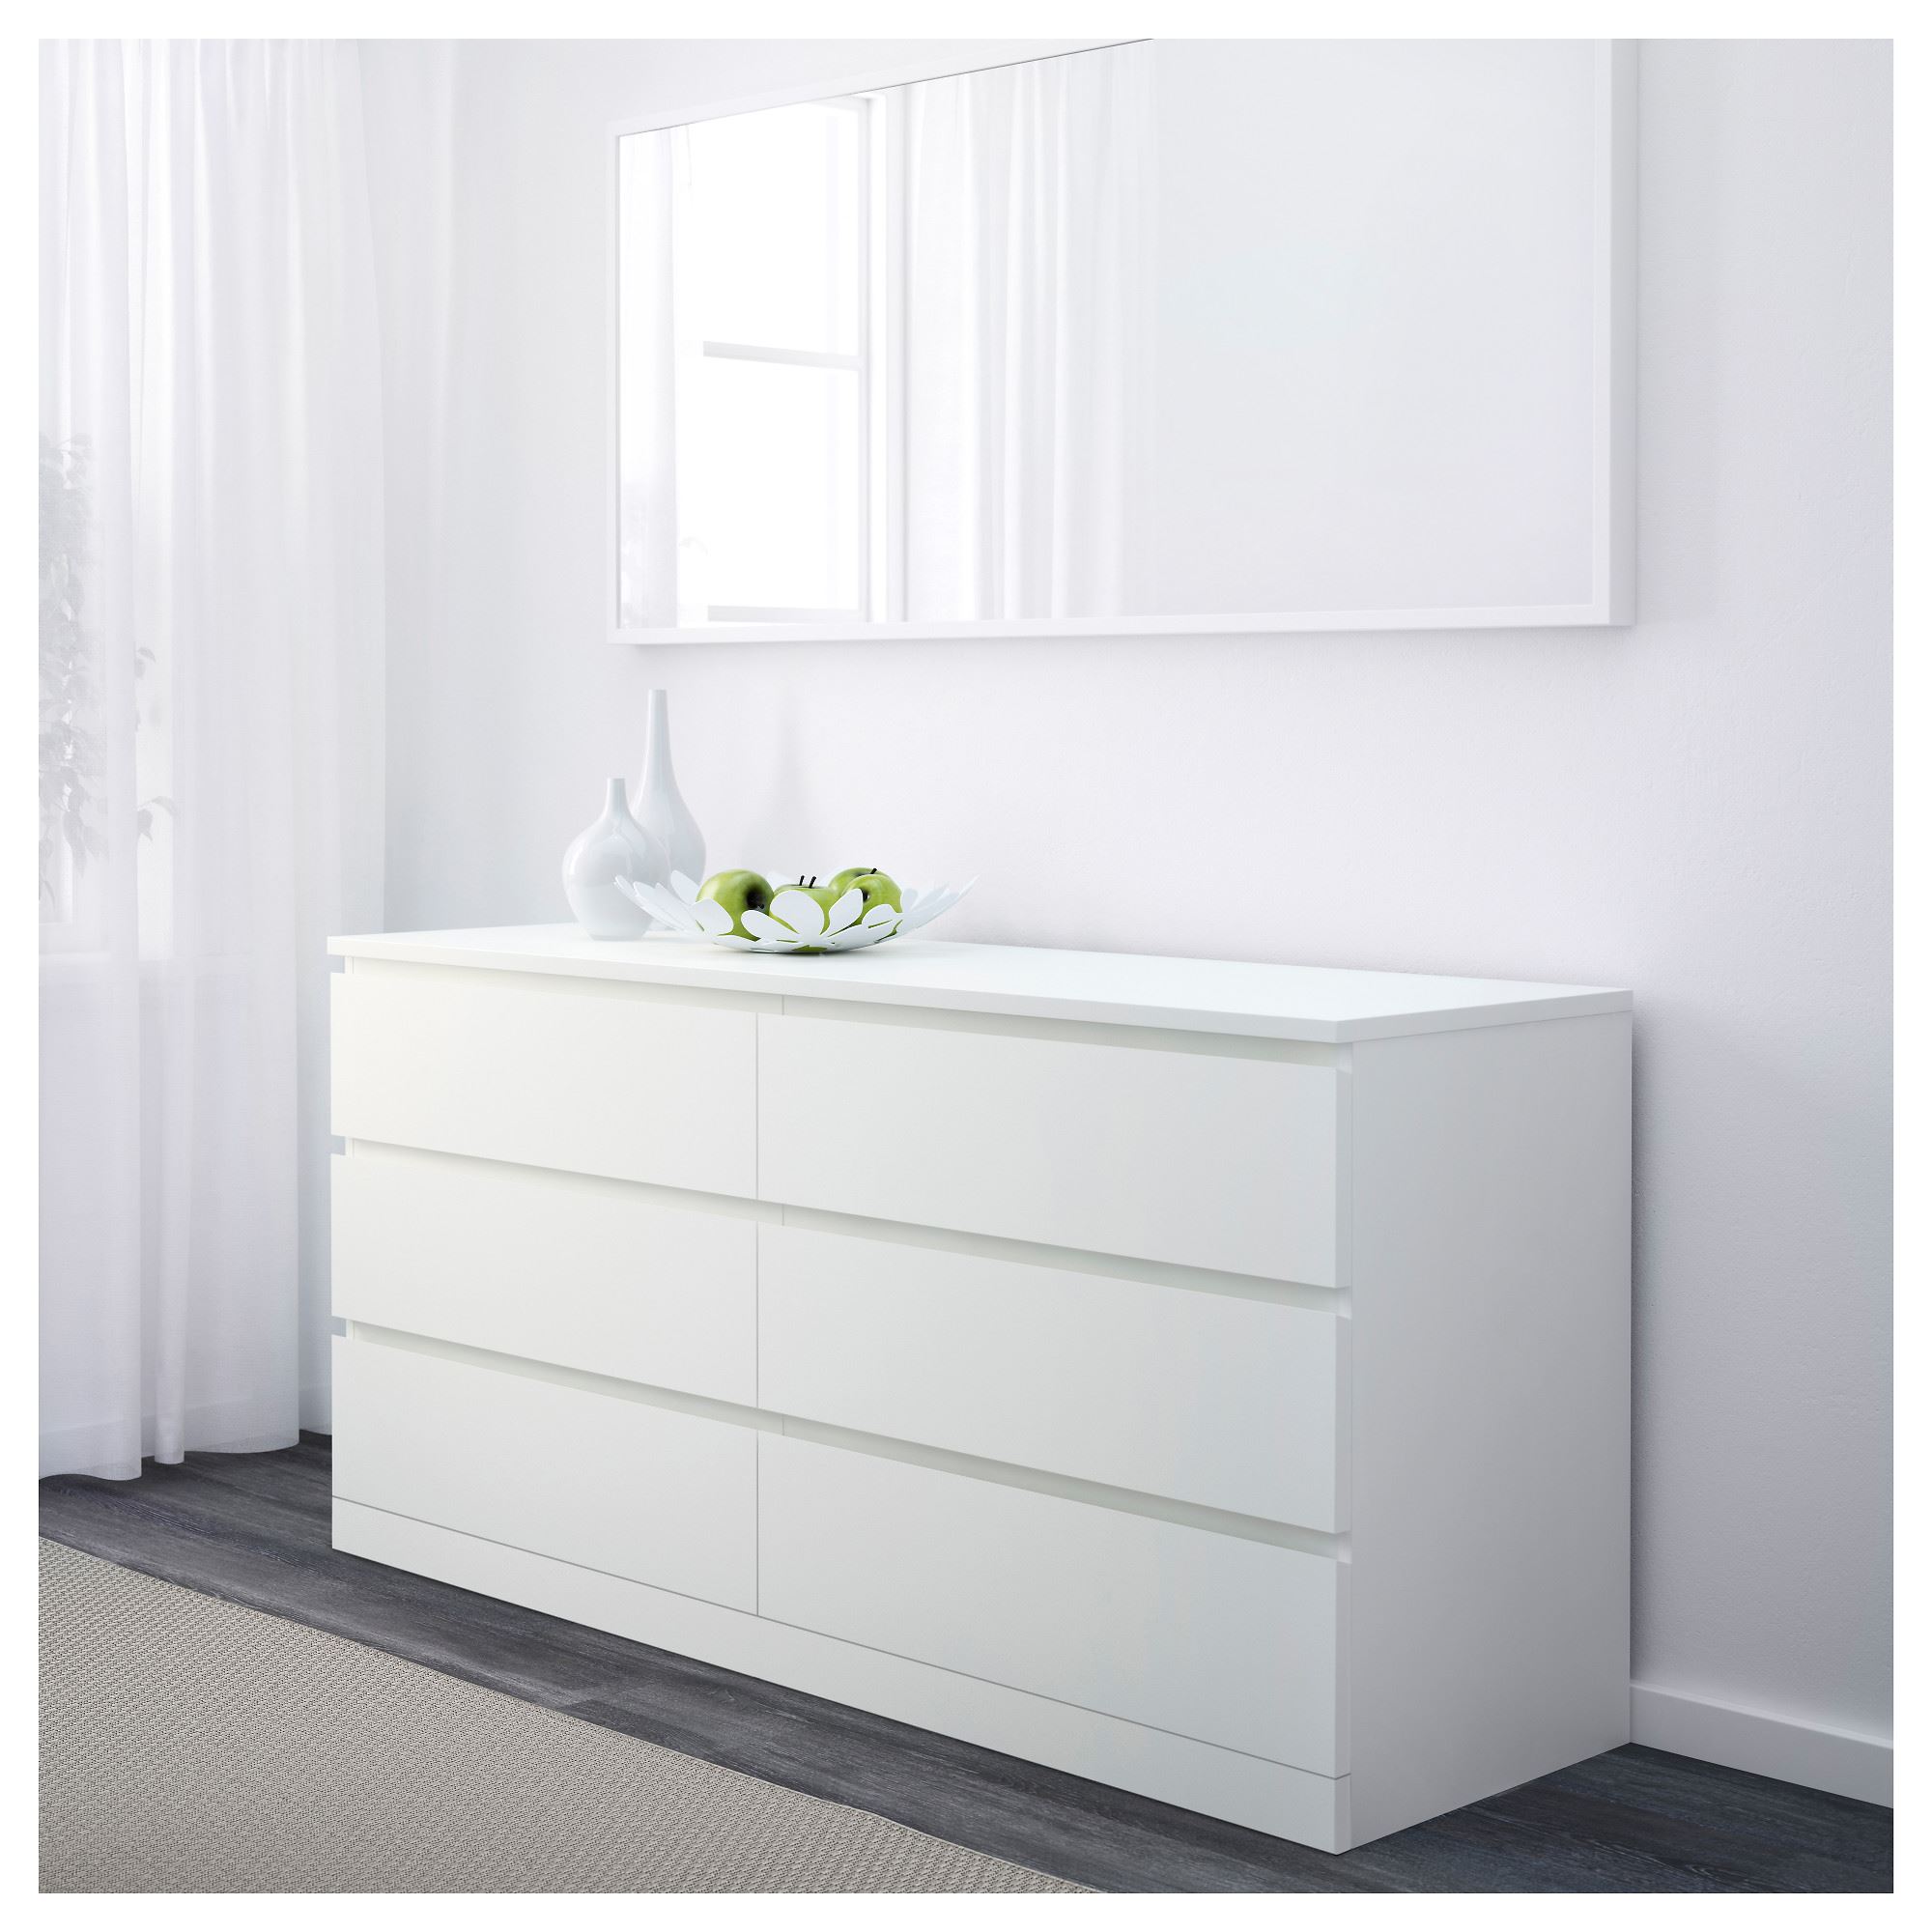 MALM chest of 6 drawers white 160x78 cm  IKEA Bedroom